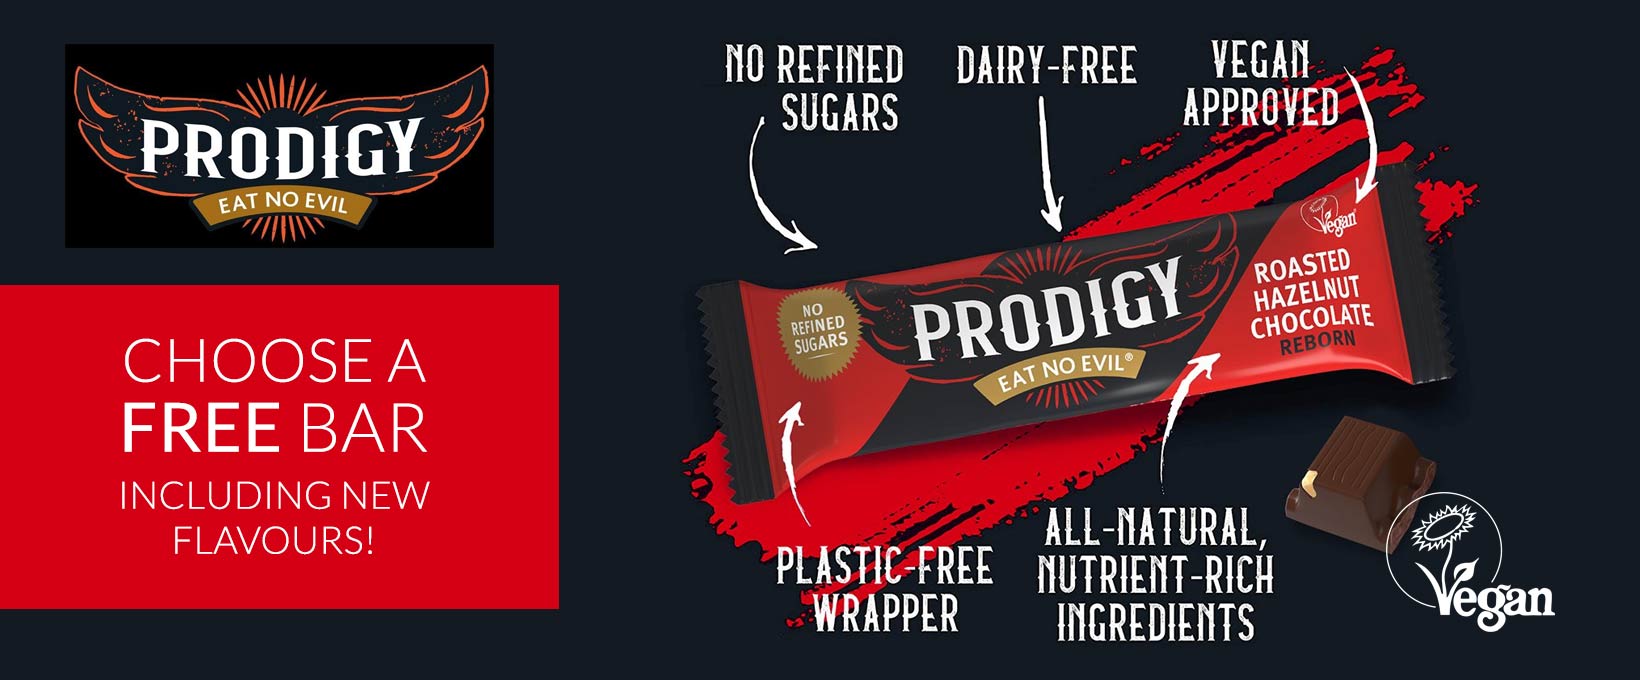 Try a FREE Prodigy snack bar with your order